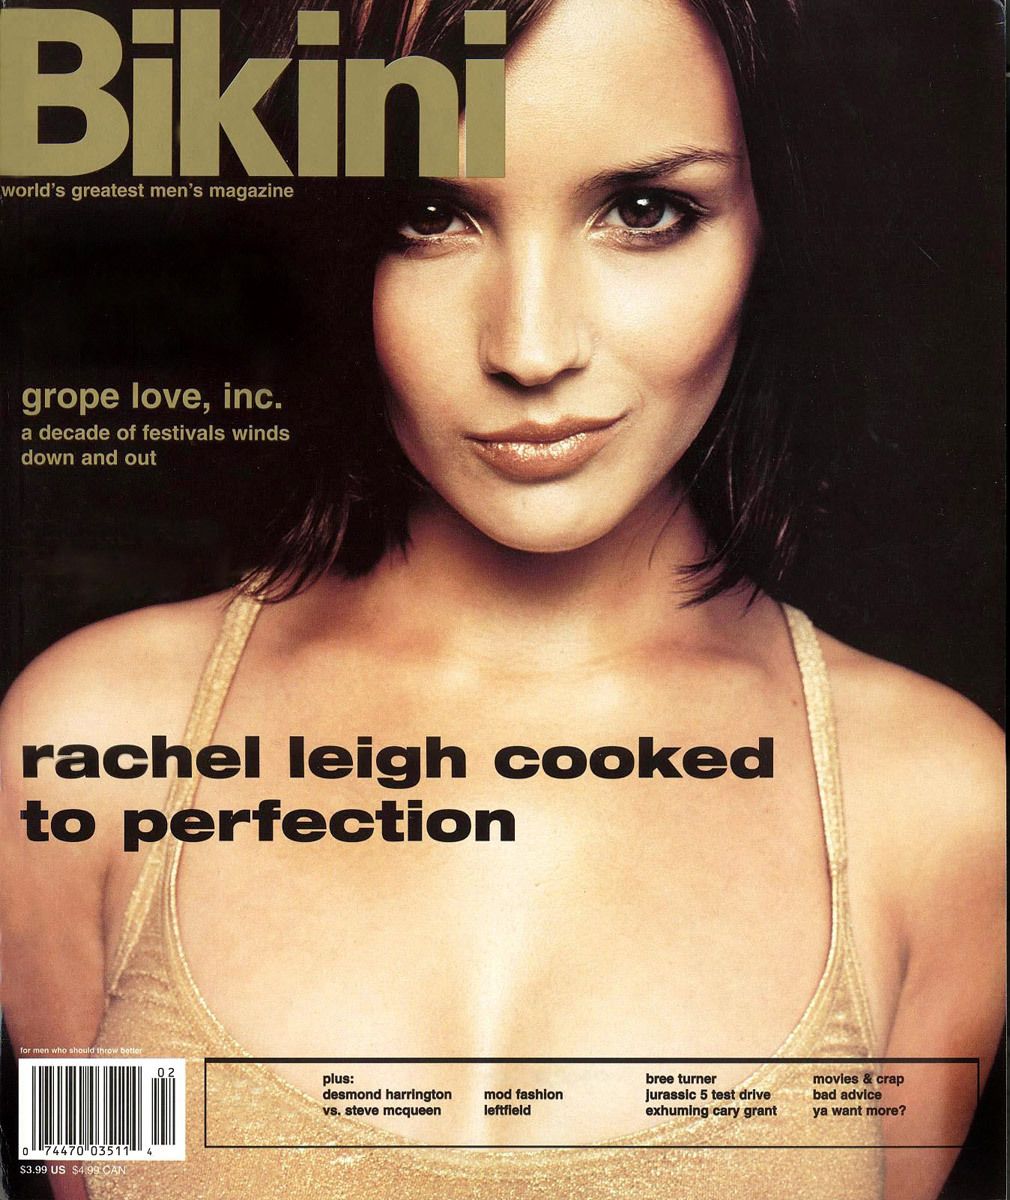 Does Rachael Leigh Cook Struggle With A Smoking Habit?